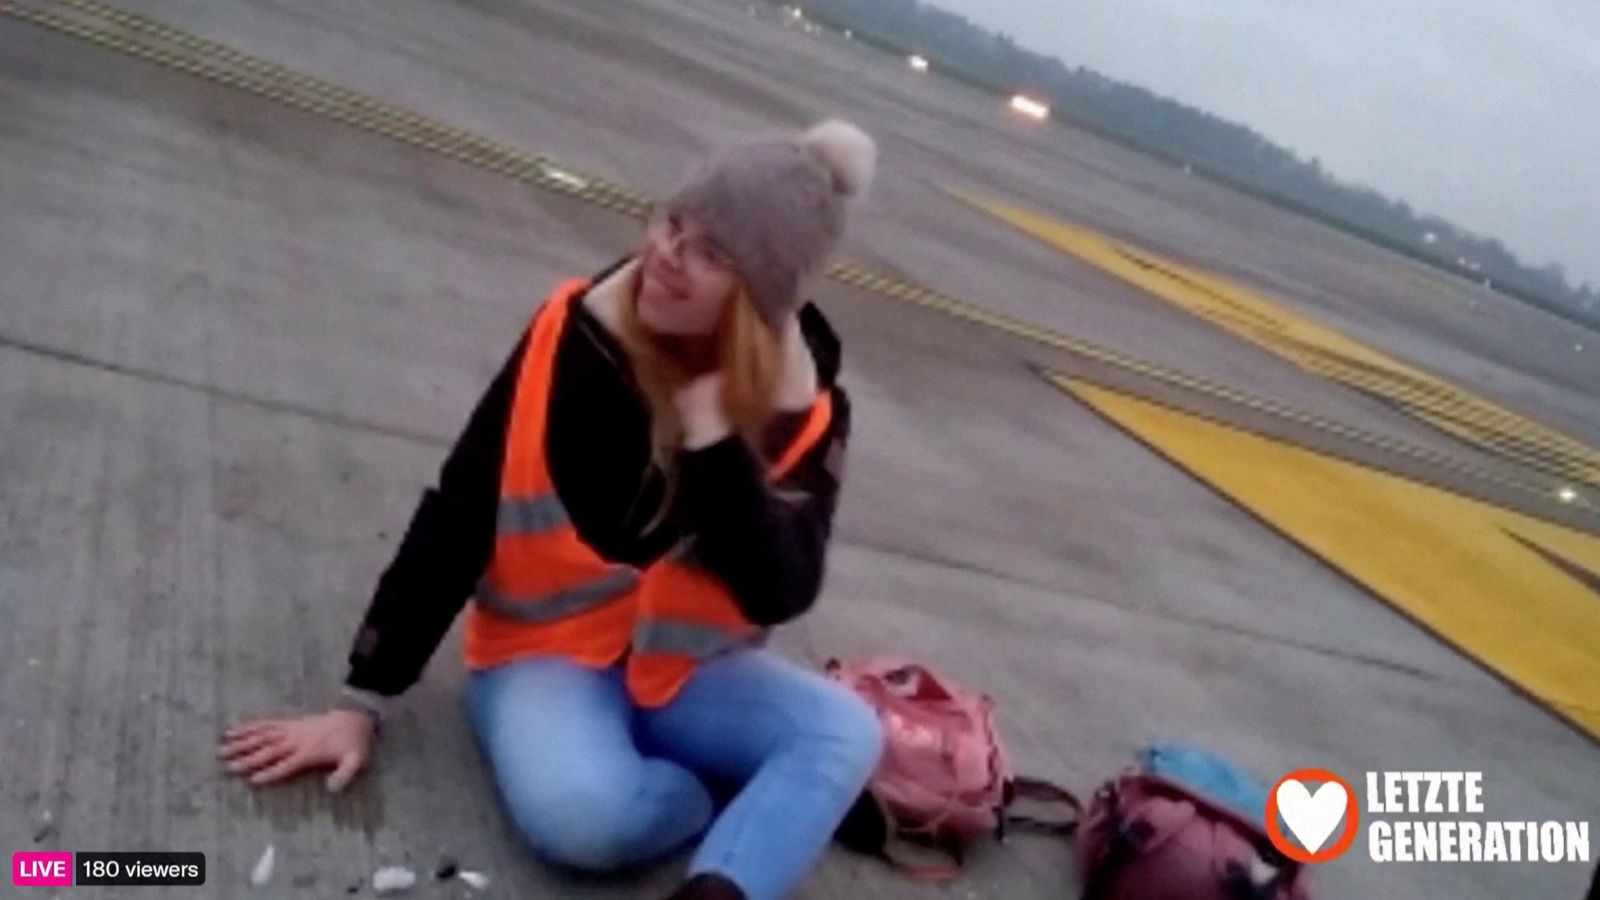 Climate activists glue themselves to runway at Berlin airport